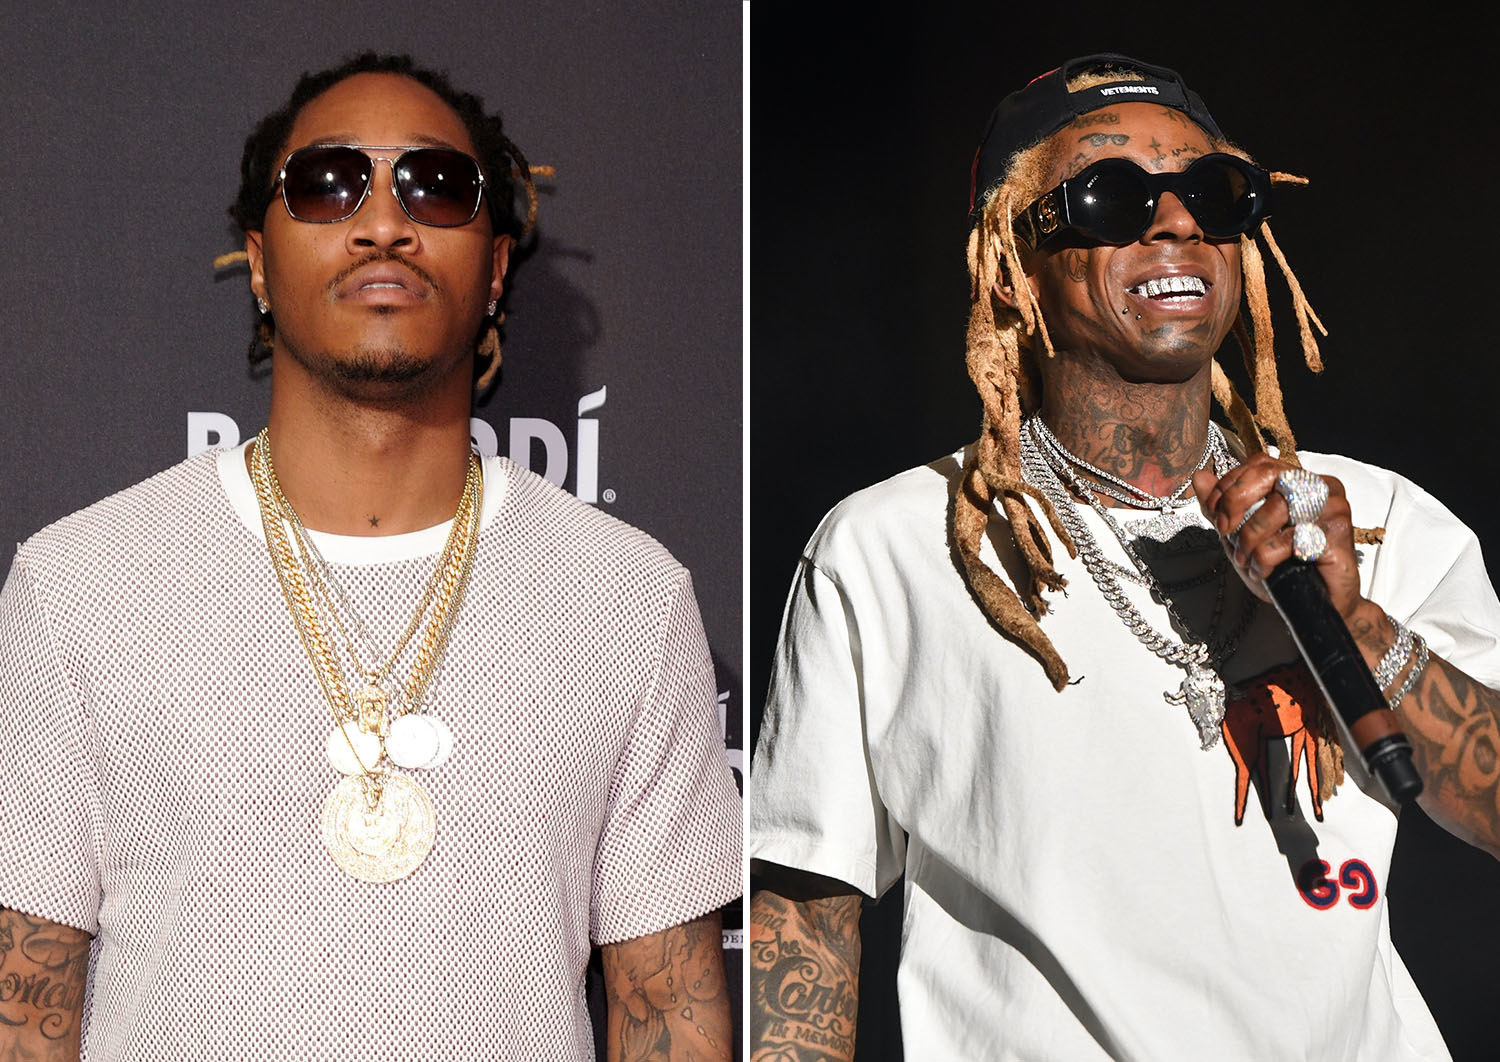 Future wearing multiple chains and sunglasses, and Lil Wayne wearing sunglasses and holding a microphone